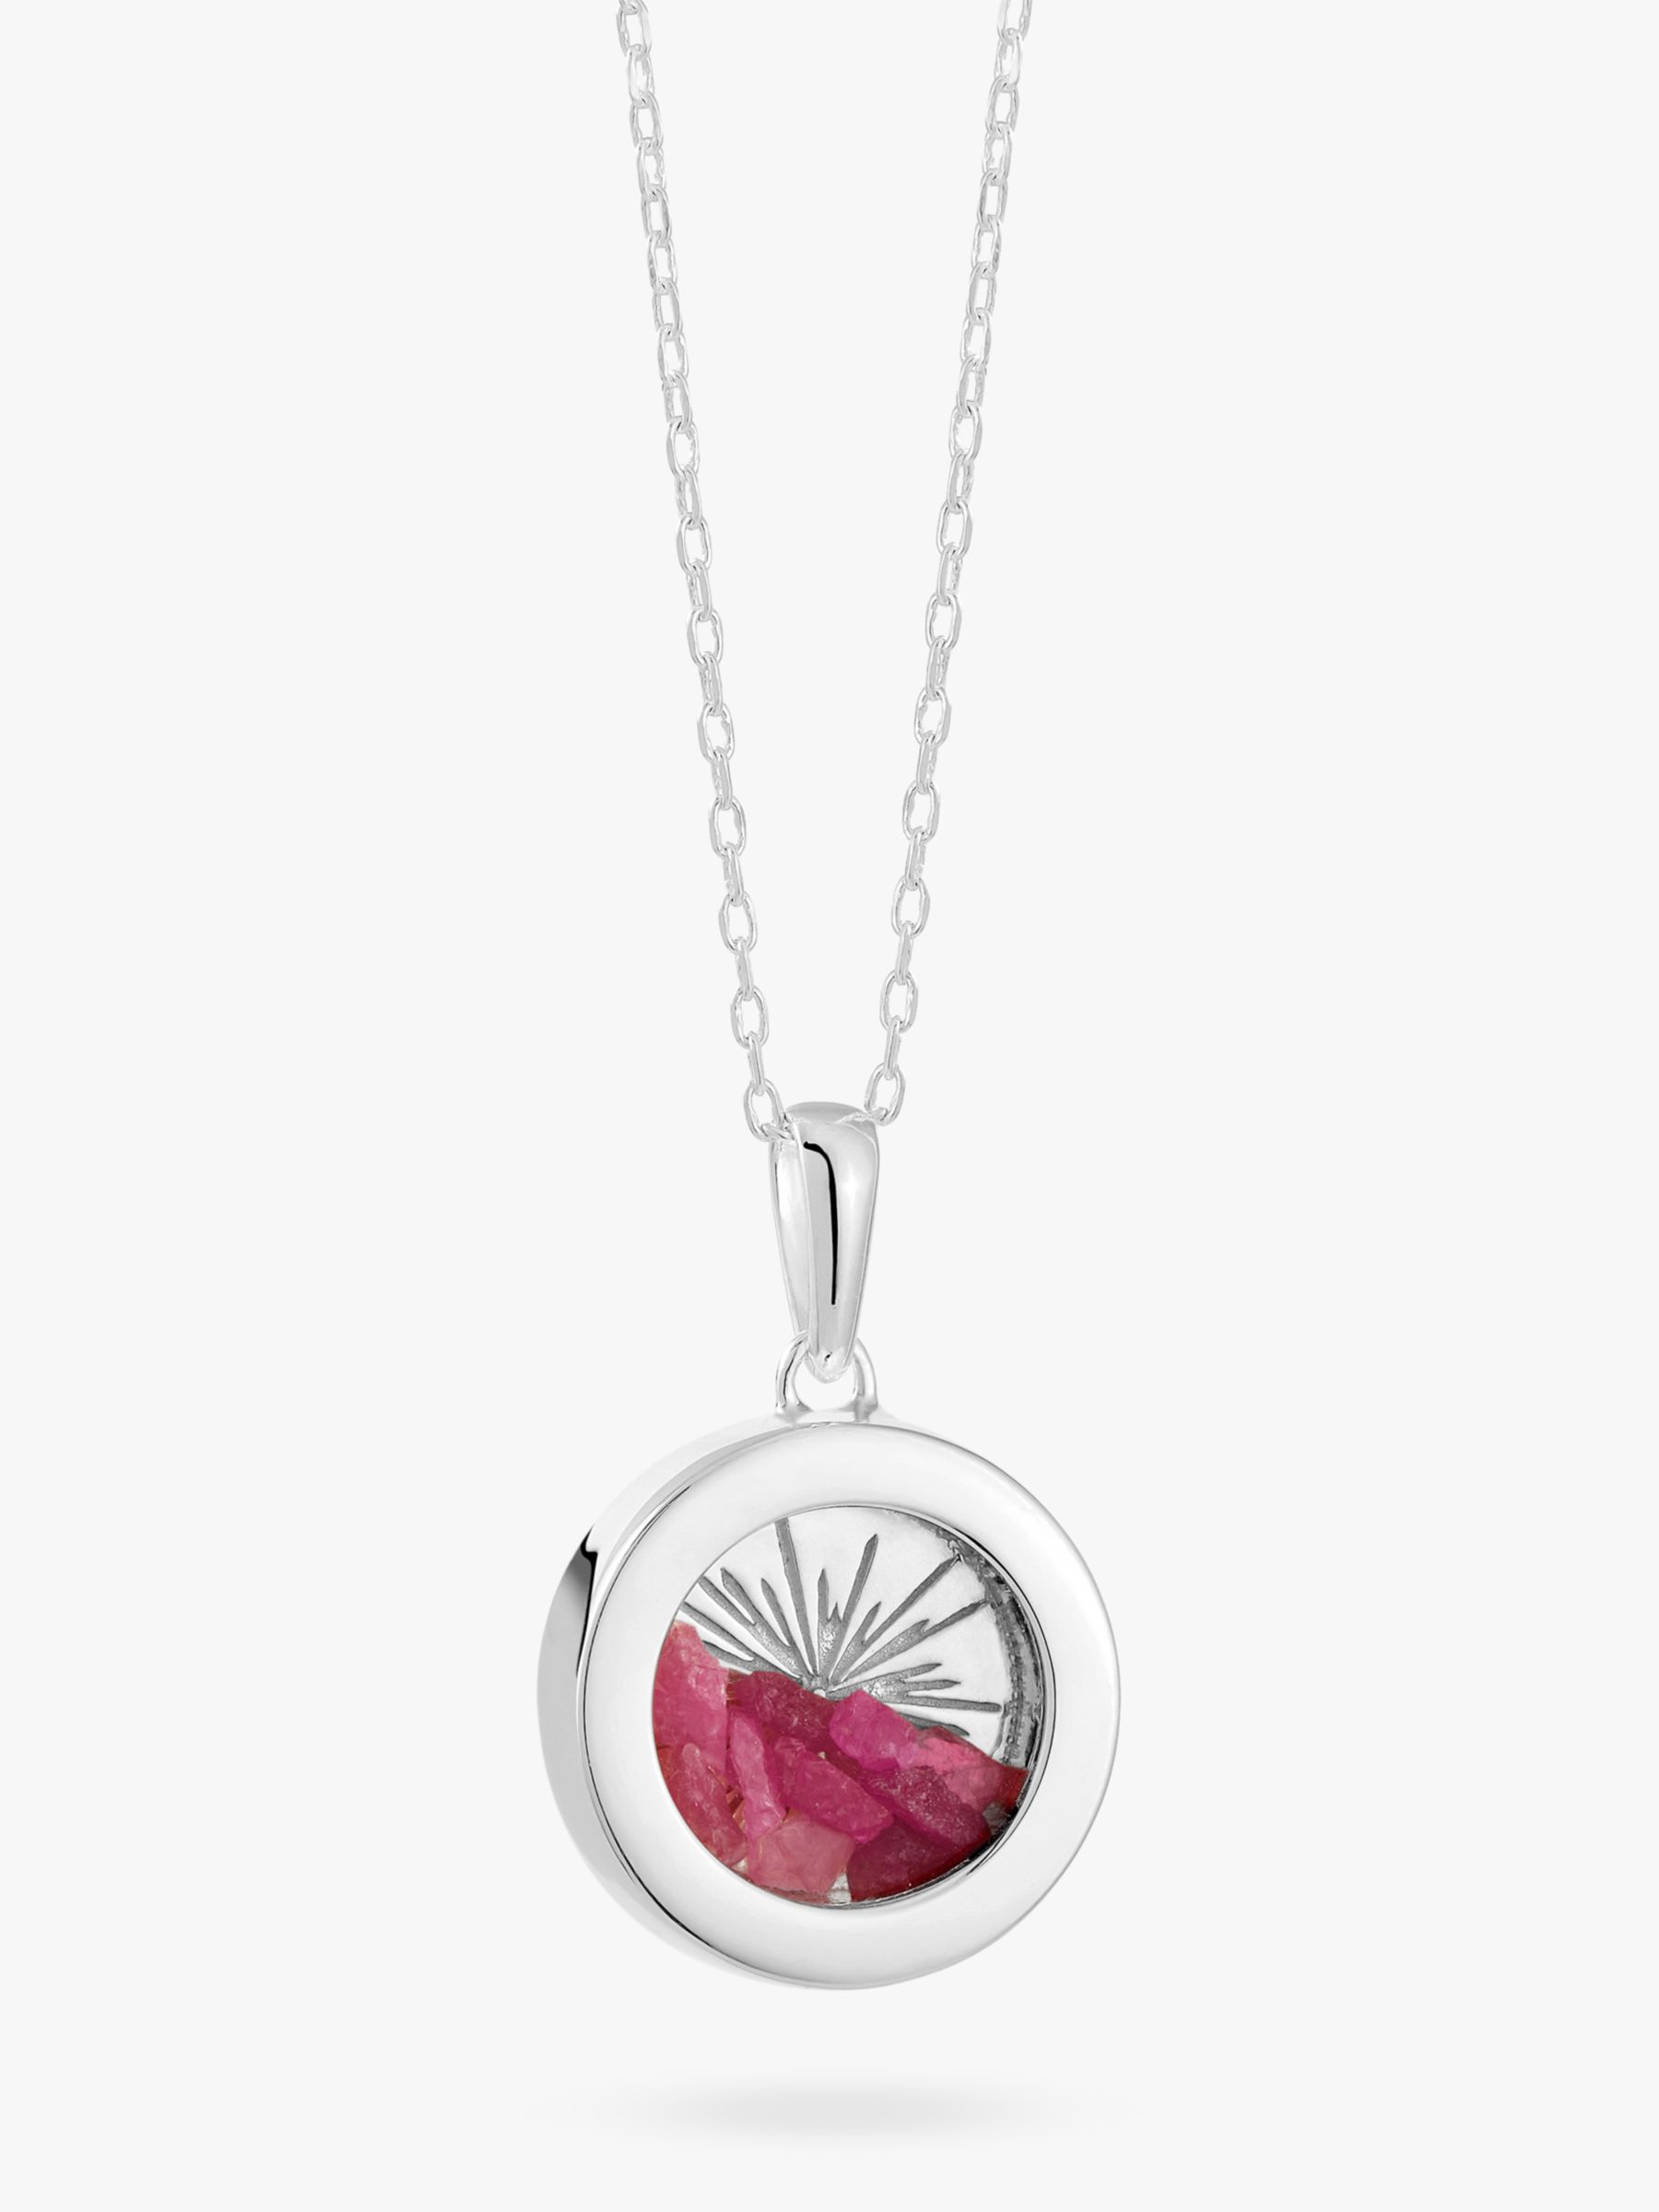 Rachel Jackson London Personalised Small Deco Sun Birthstone Amulet Necklace, Silver, Ruby - July